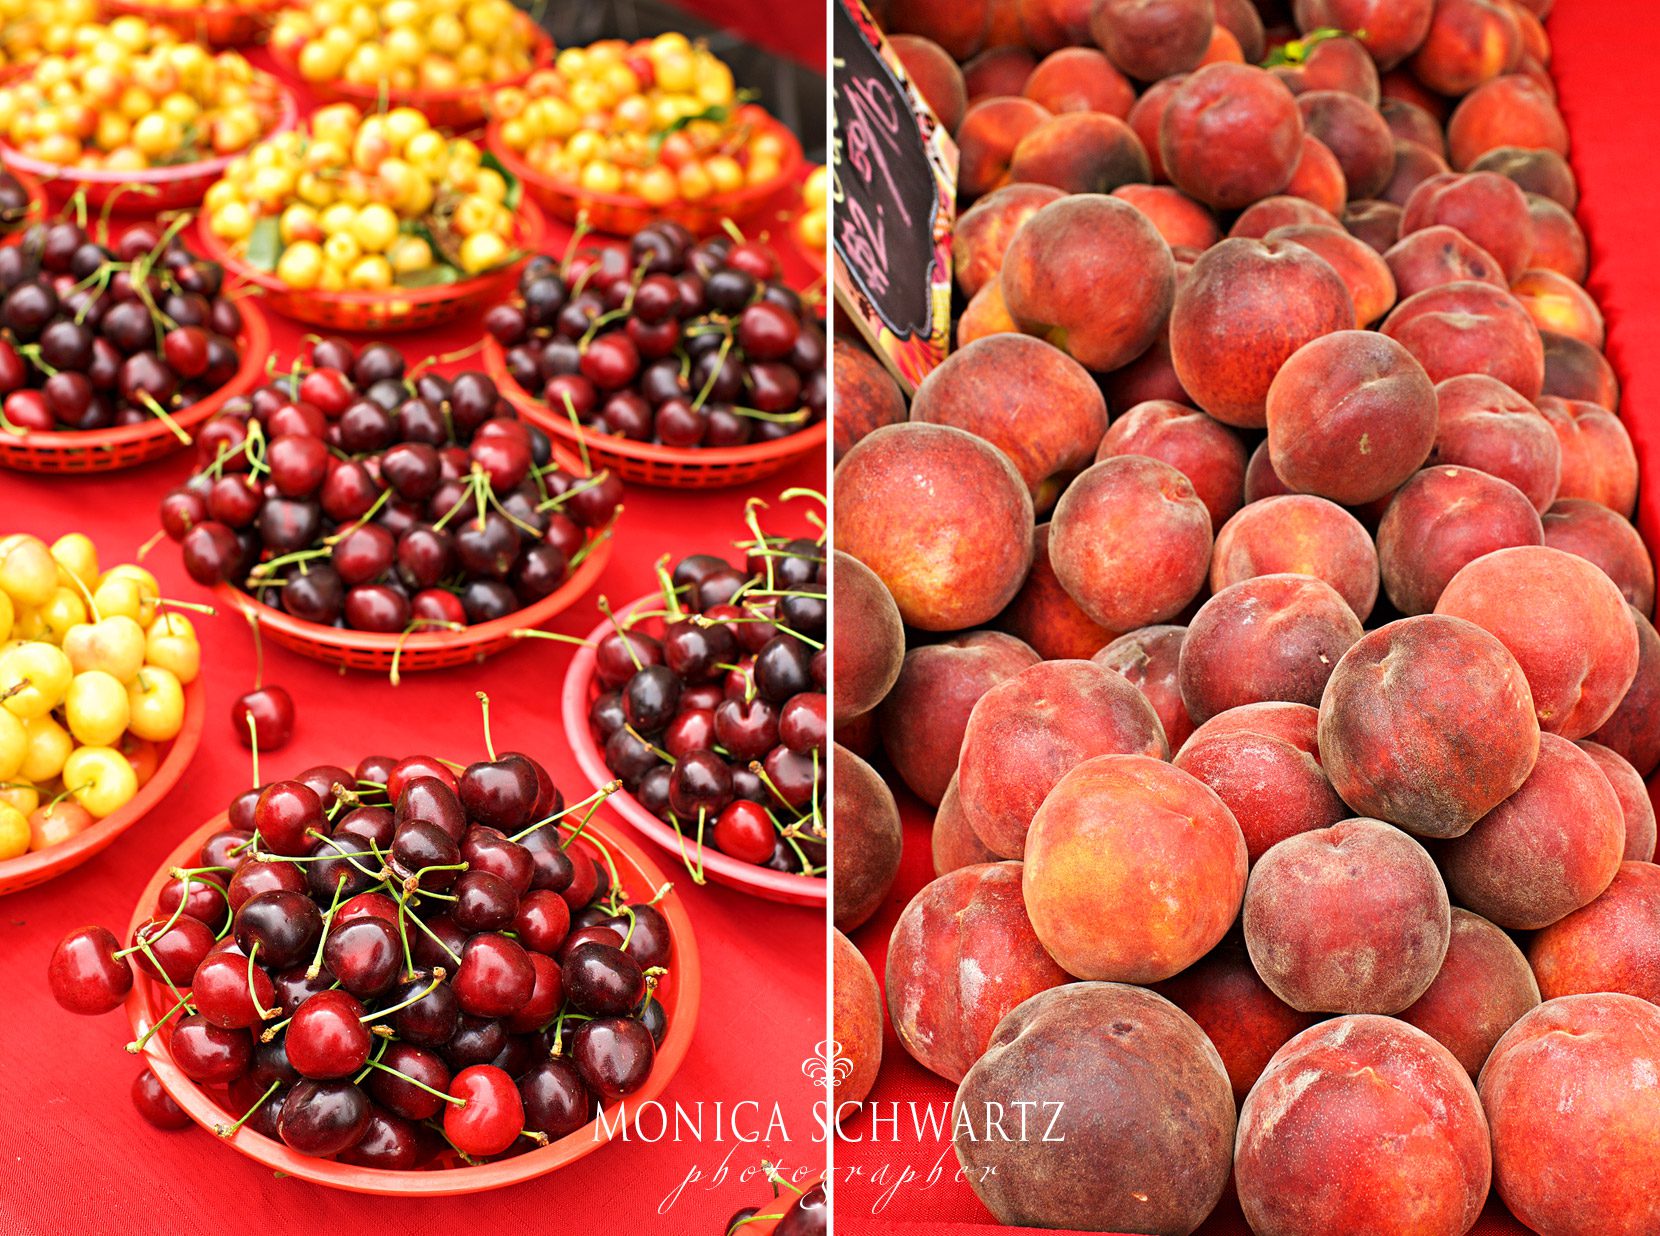 Cherries-and-peaches-at-the-farmers-market-in-Carmel-by-the-Sea-California